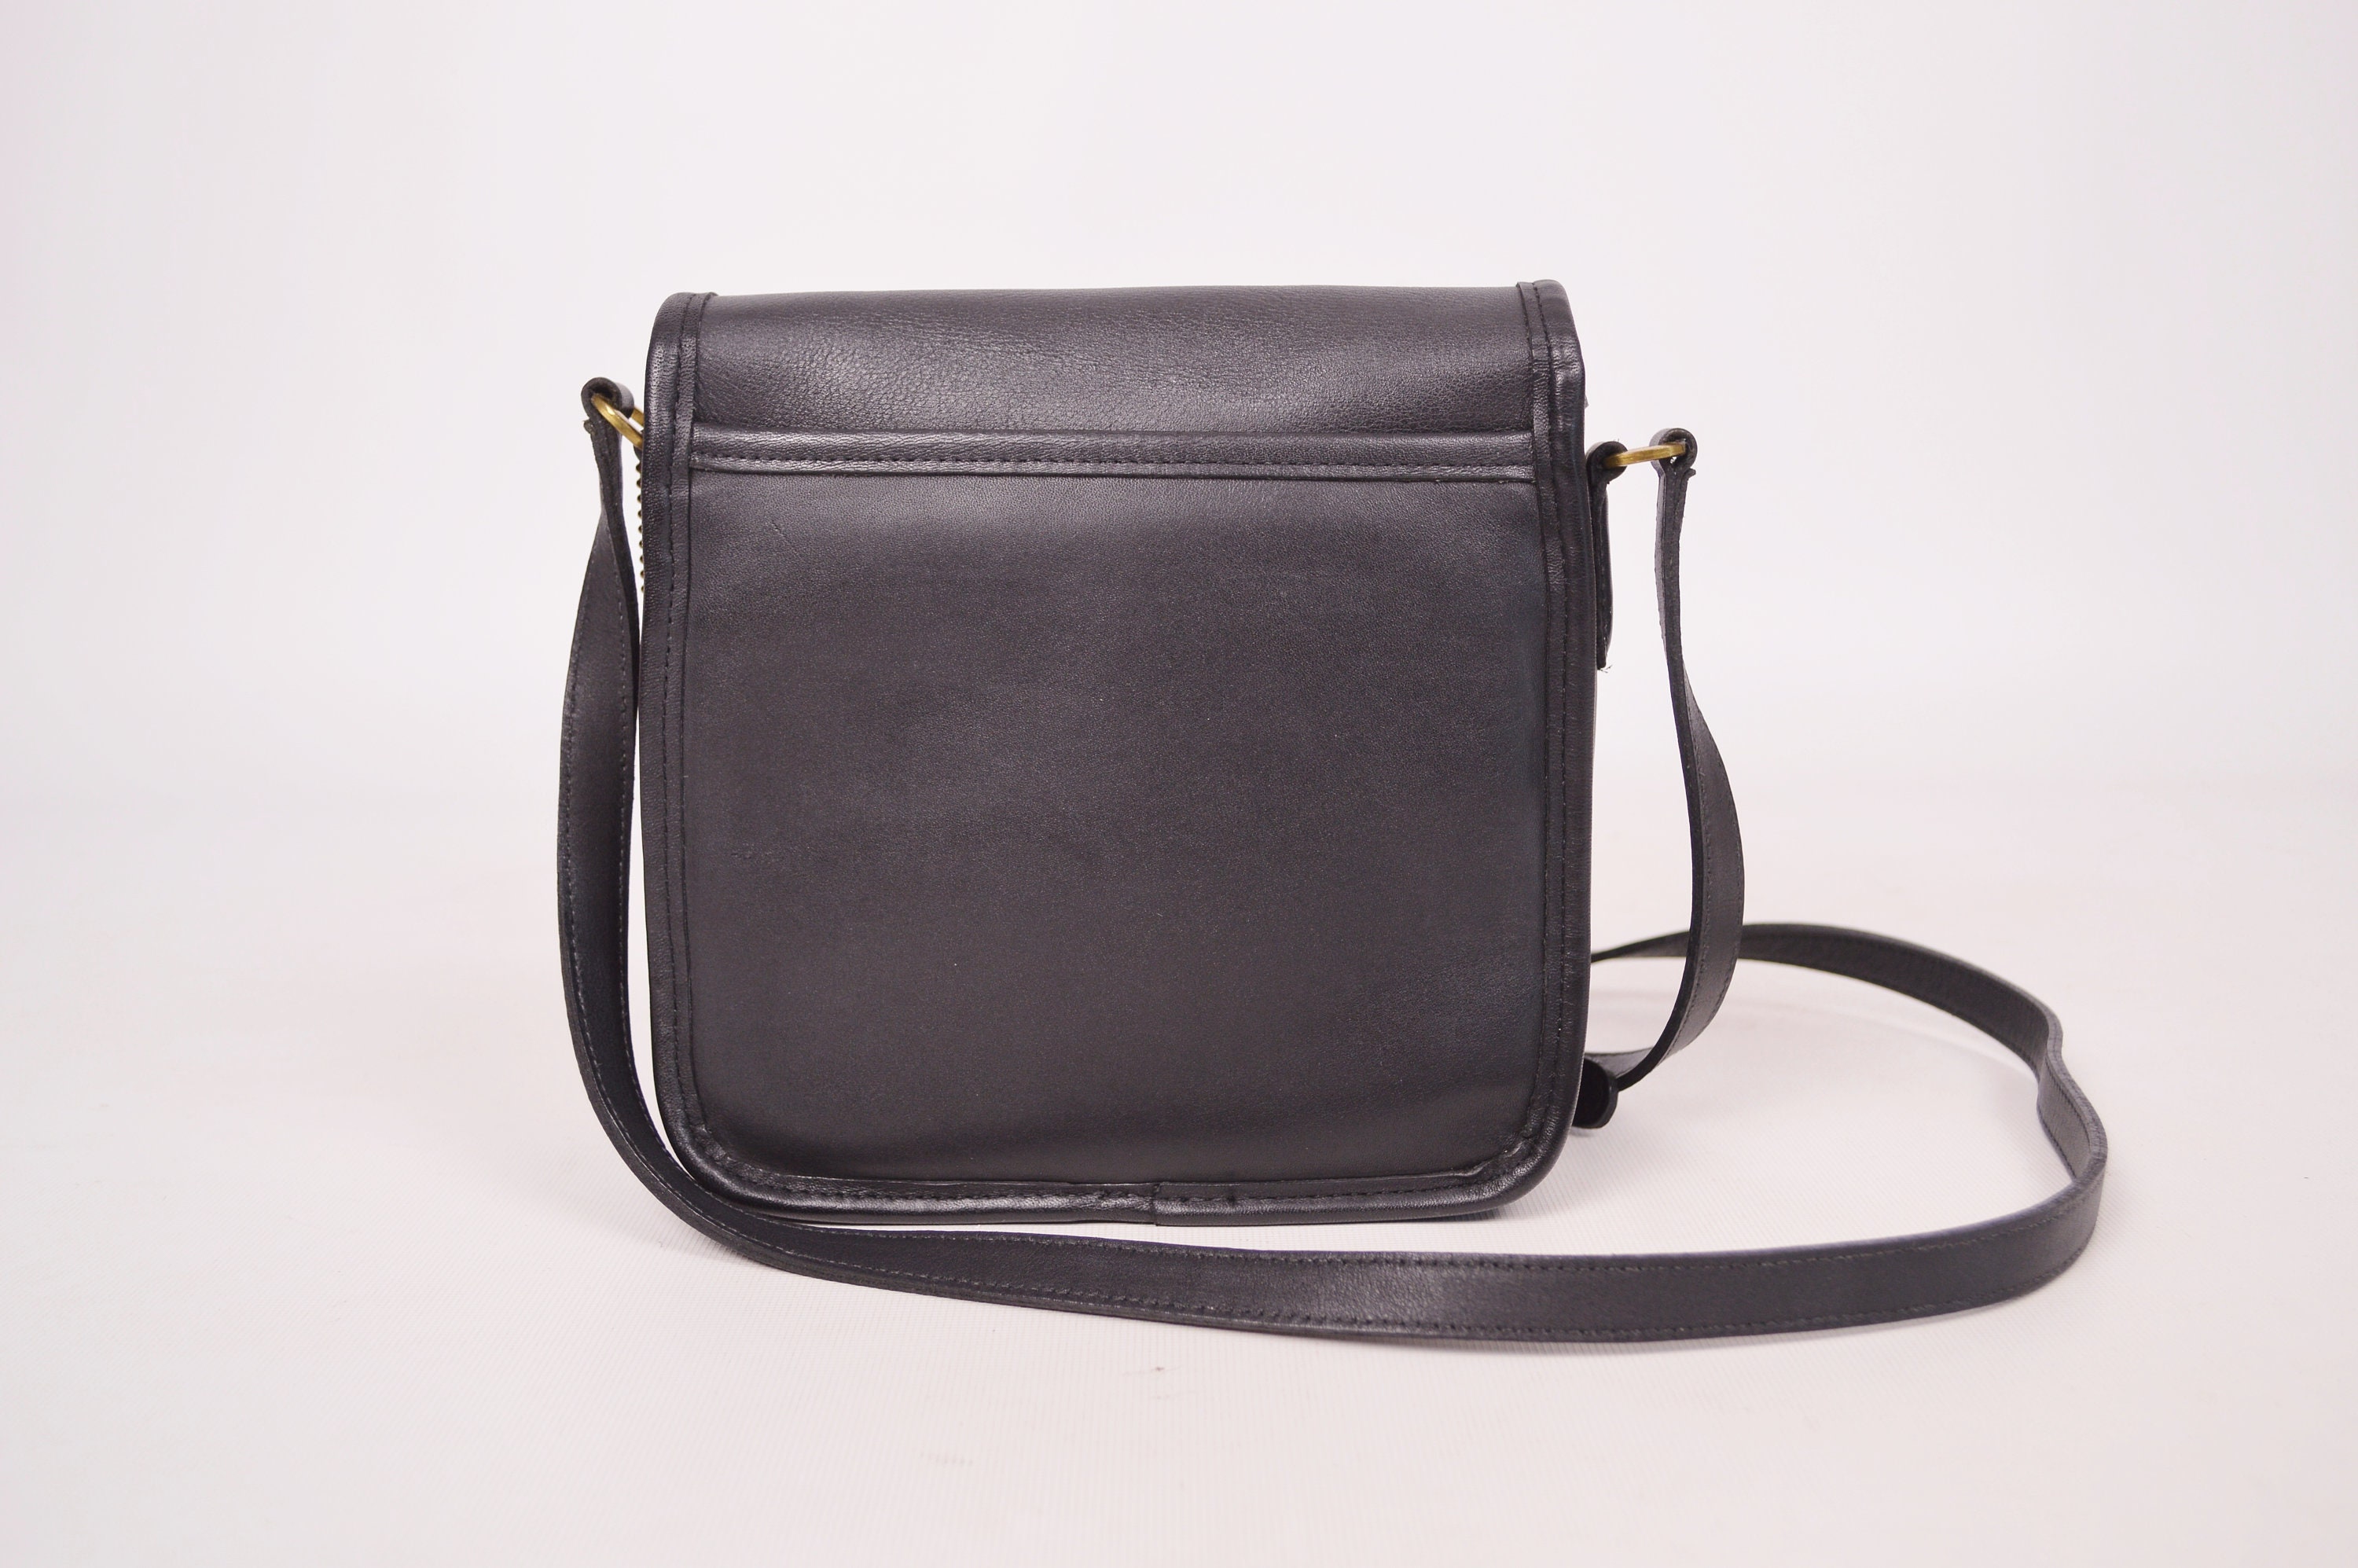 Indulge Designer Resale Boutique - Vintage Coach Legacy Companion Flap  Crossbody!! Price $49.99 We are open 12-5 today!!